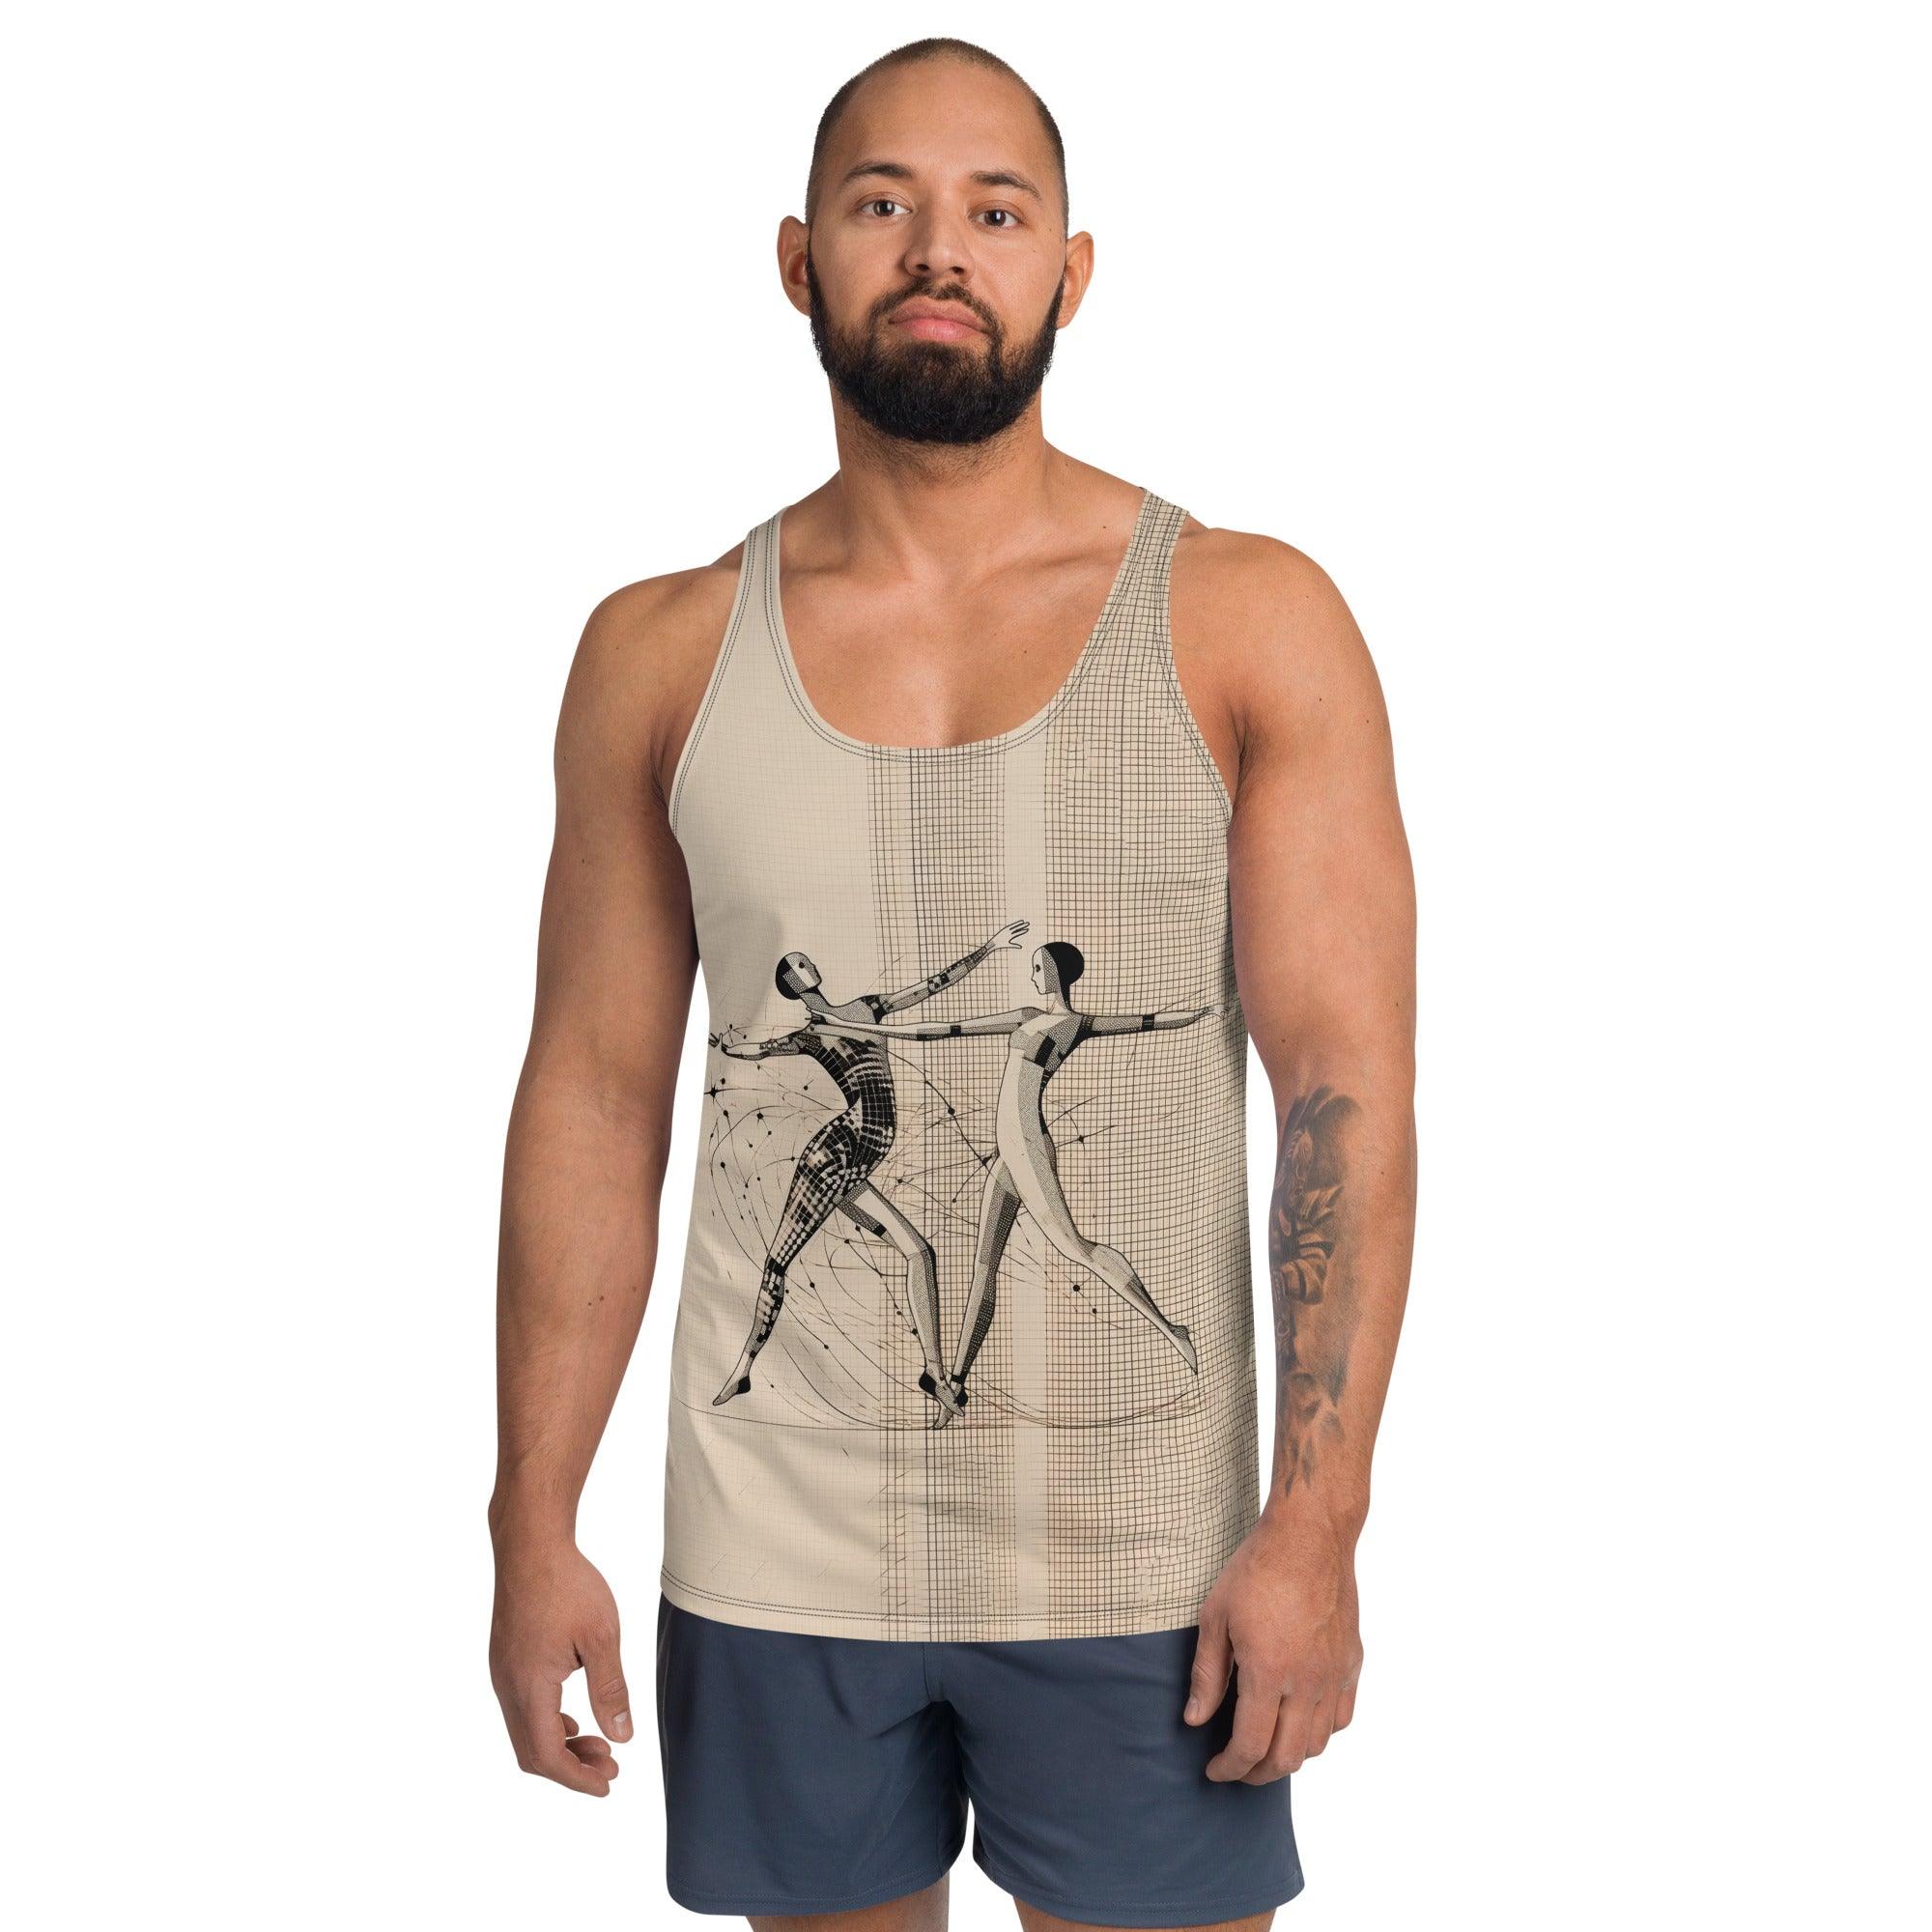 Sultry Women's Dance Style Men's Tank Top - Beyond T-shirts